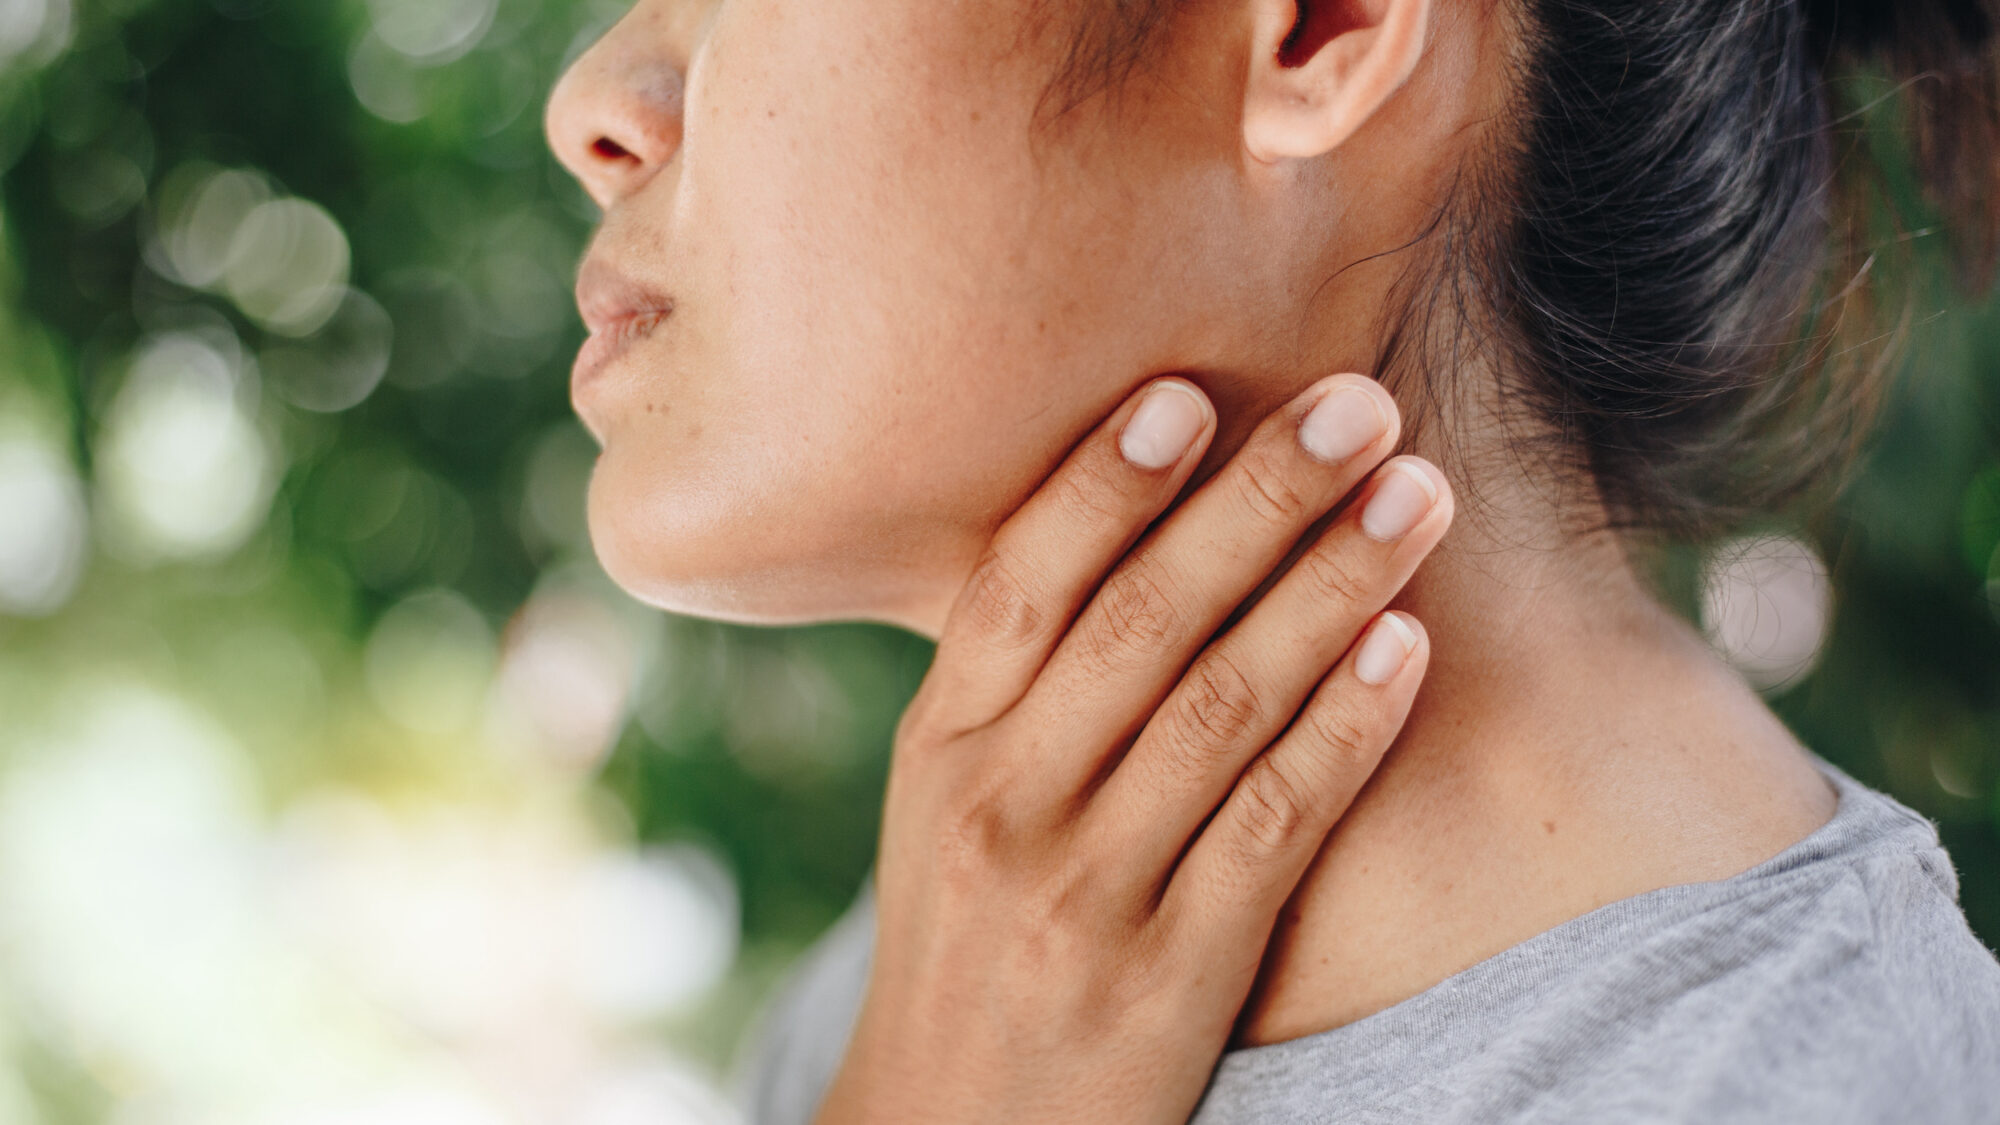 Woman with sore throat touches neck wonder if it is head and neck cancer | cCARE | San Diego & Fresno, CA